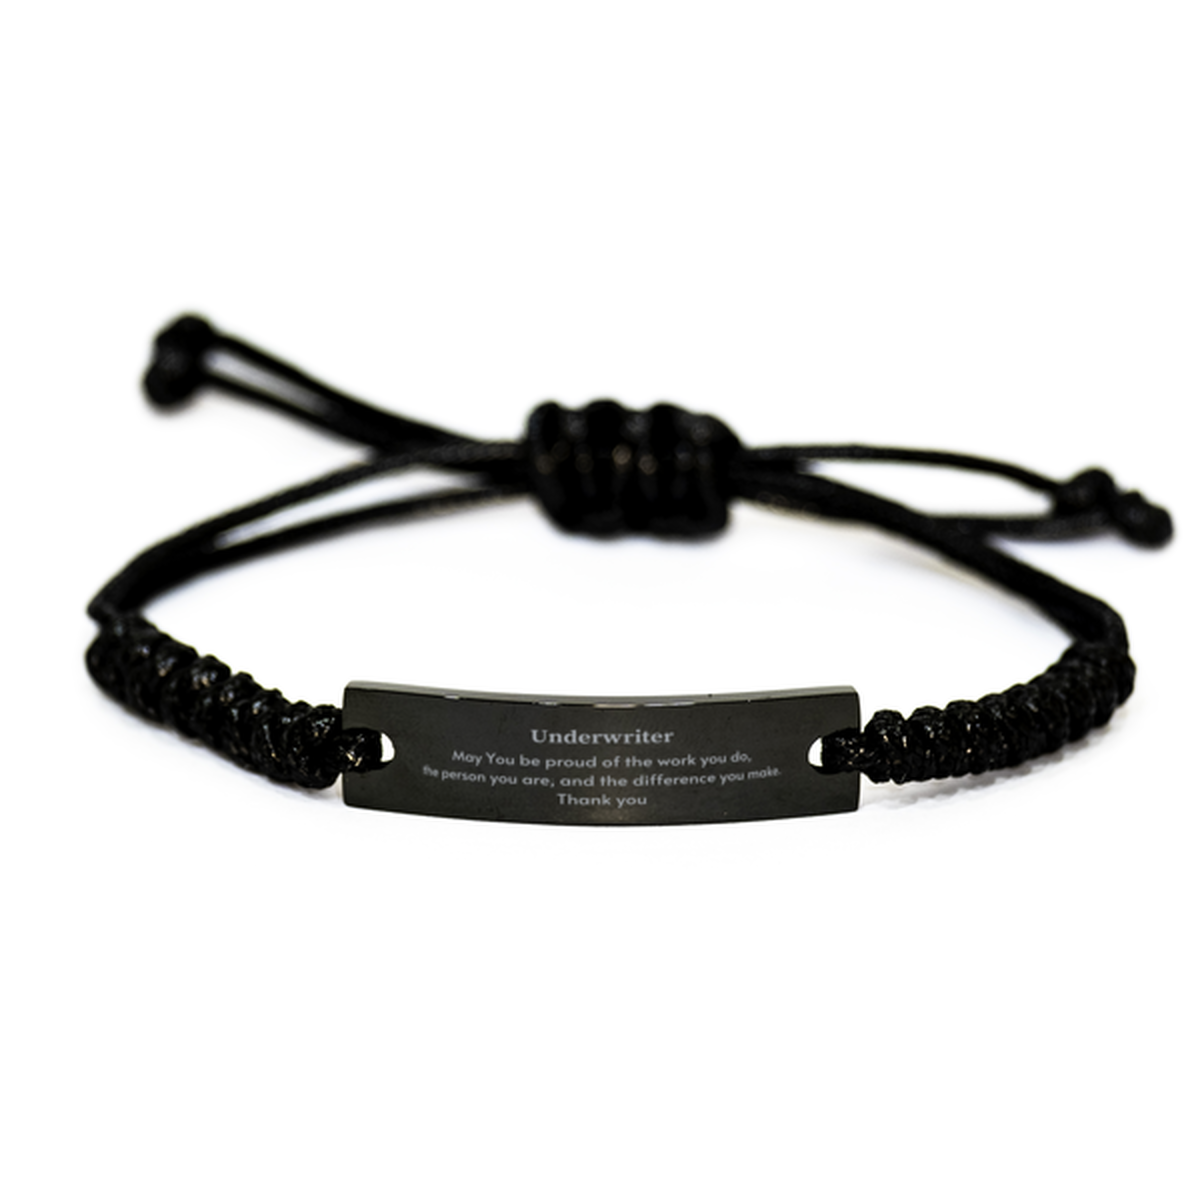 Heartwarming Black Rope Bracelet Retirement Coworkers Gifts for Underwriter, Underwriter May You be proud of the work you do, the person you are Gifts for Boss Men Women Friends